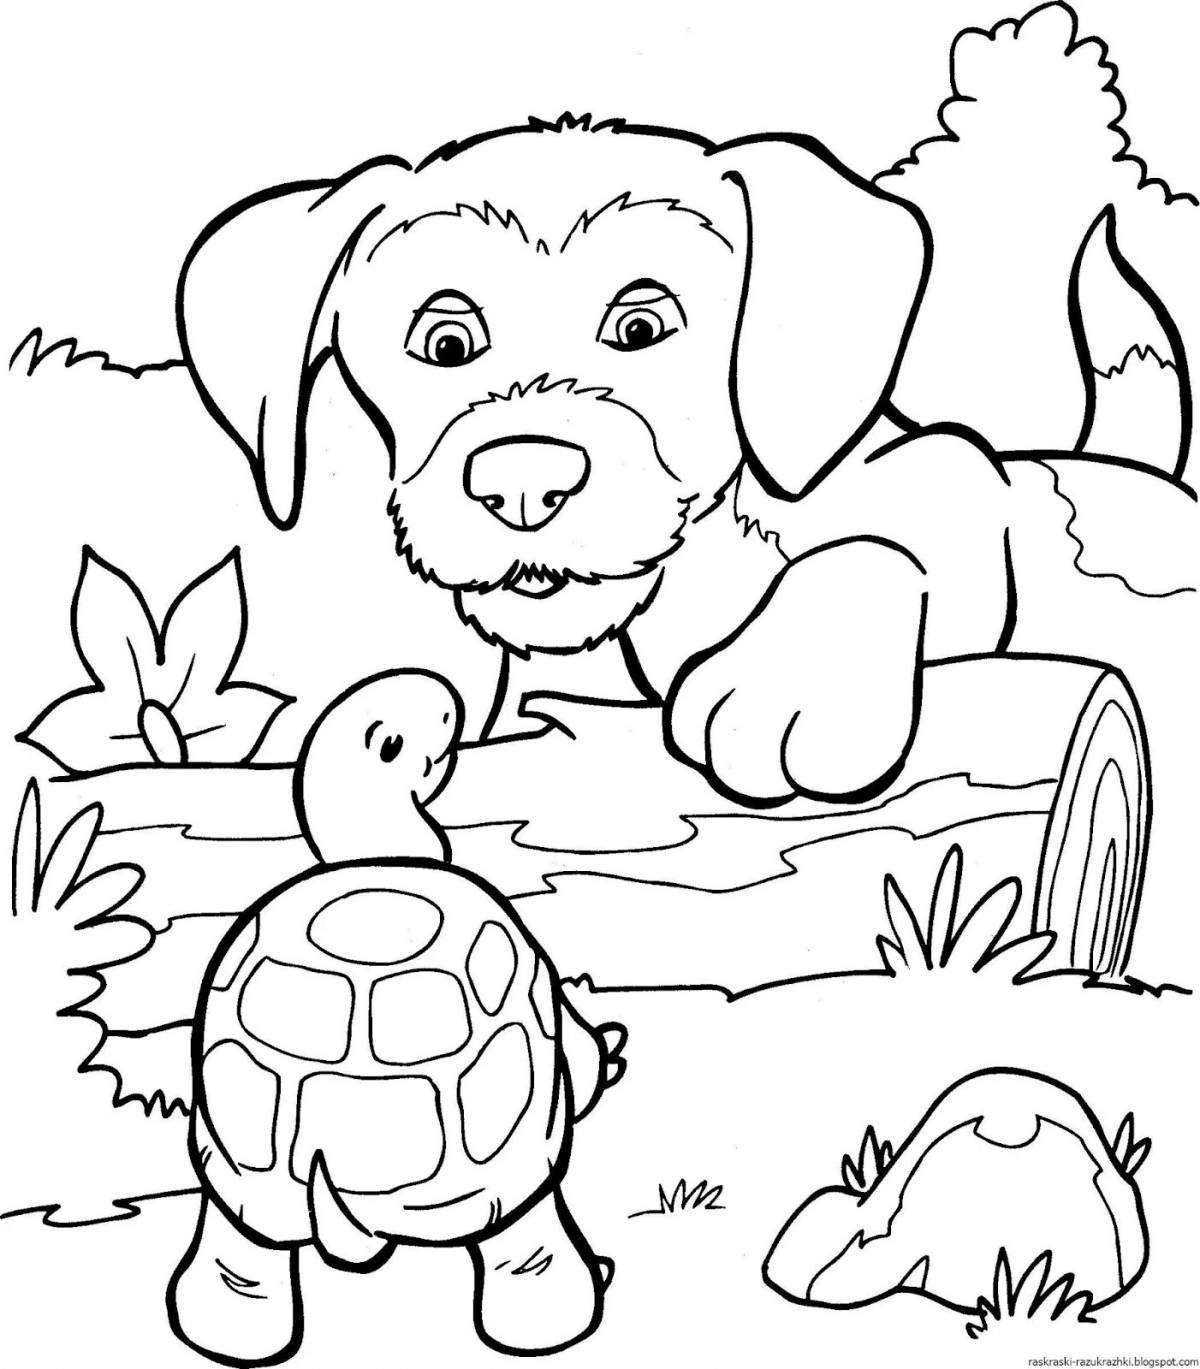 Amazing dog coloring book for kids 7-8 years old